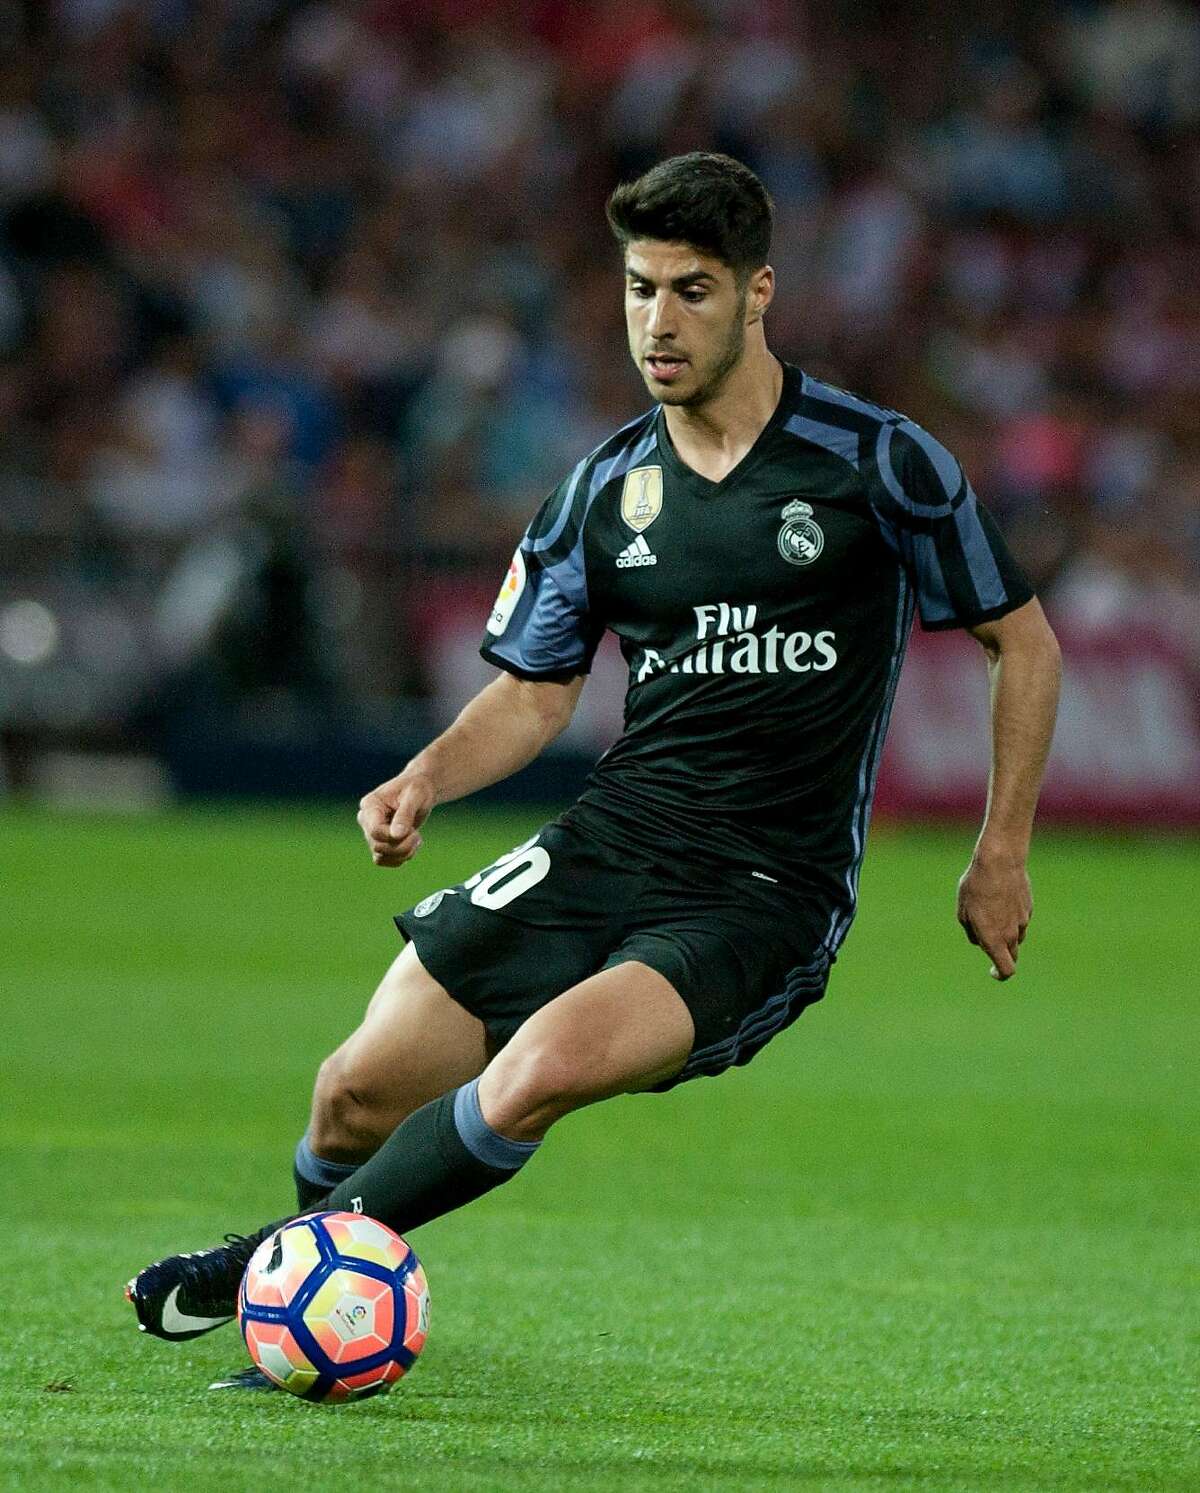 (FILES) This file photo taken on May 06, 2017 shows Real Madrid's forward Alvaro Morata controls the ball during the Spanish league football match Granada FC vs Real Madrid CF at Nuevo Los Carmenes stadium in Granada. Premier League champions Chelsea completed the signing of Real Madrid striker Alvaro Morata on a five-year-deal on July 21, 2017, in a deal reported to be worth 80 million euros. / AFP PHOTO / SERGIO CAMACHOSERGIO CAMACHO/AFP/Getty Images